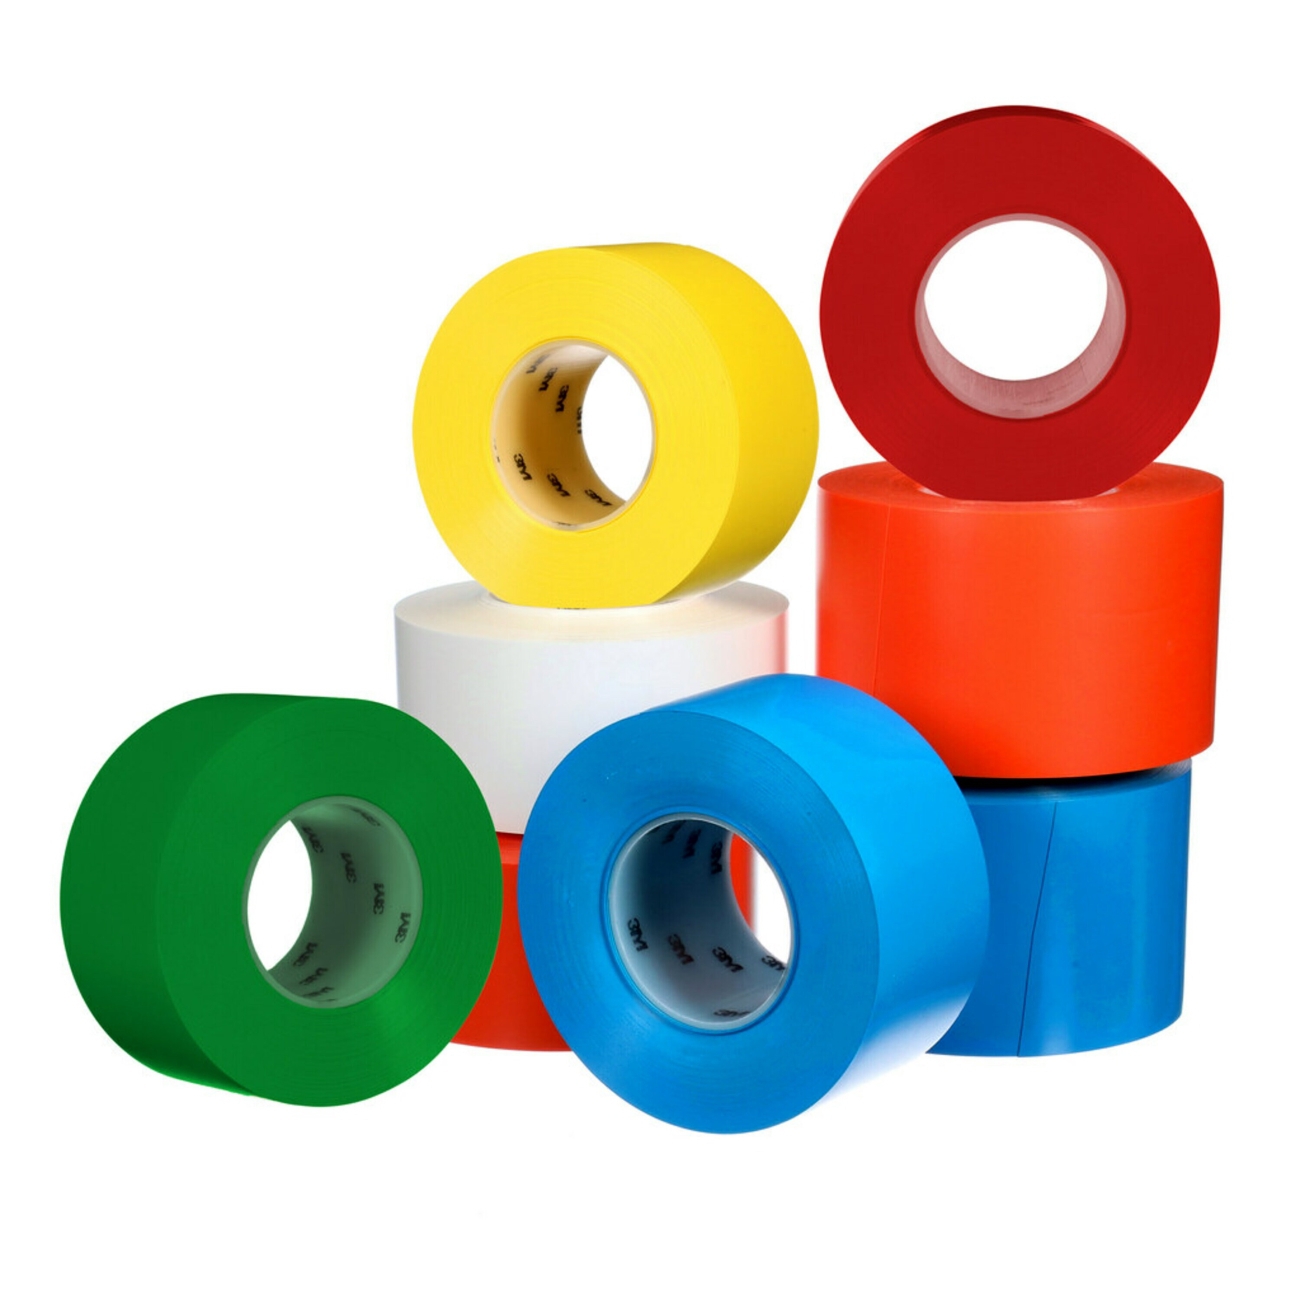 3M extra strong floor marking tape 971, white, 50.8mm x 32.9m, 0.43mm